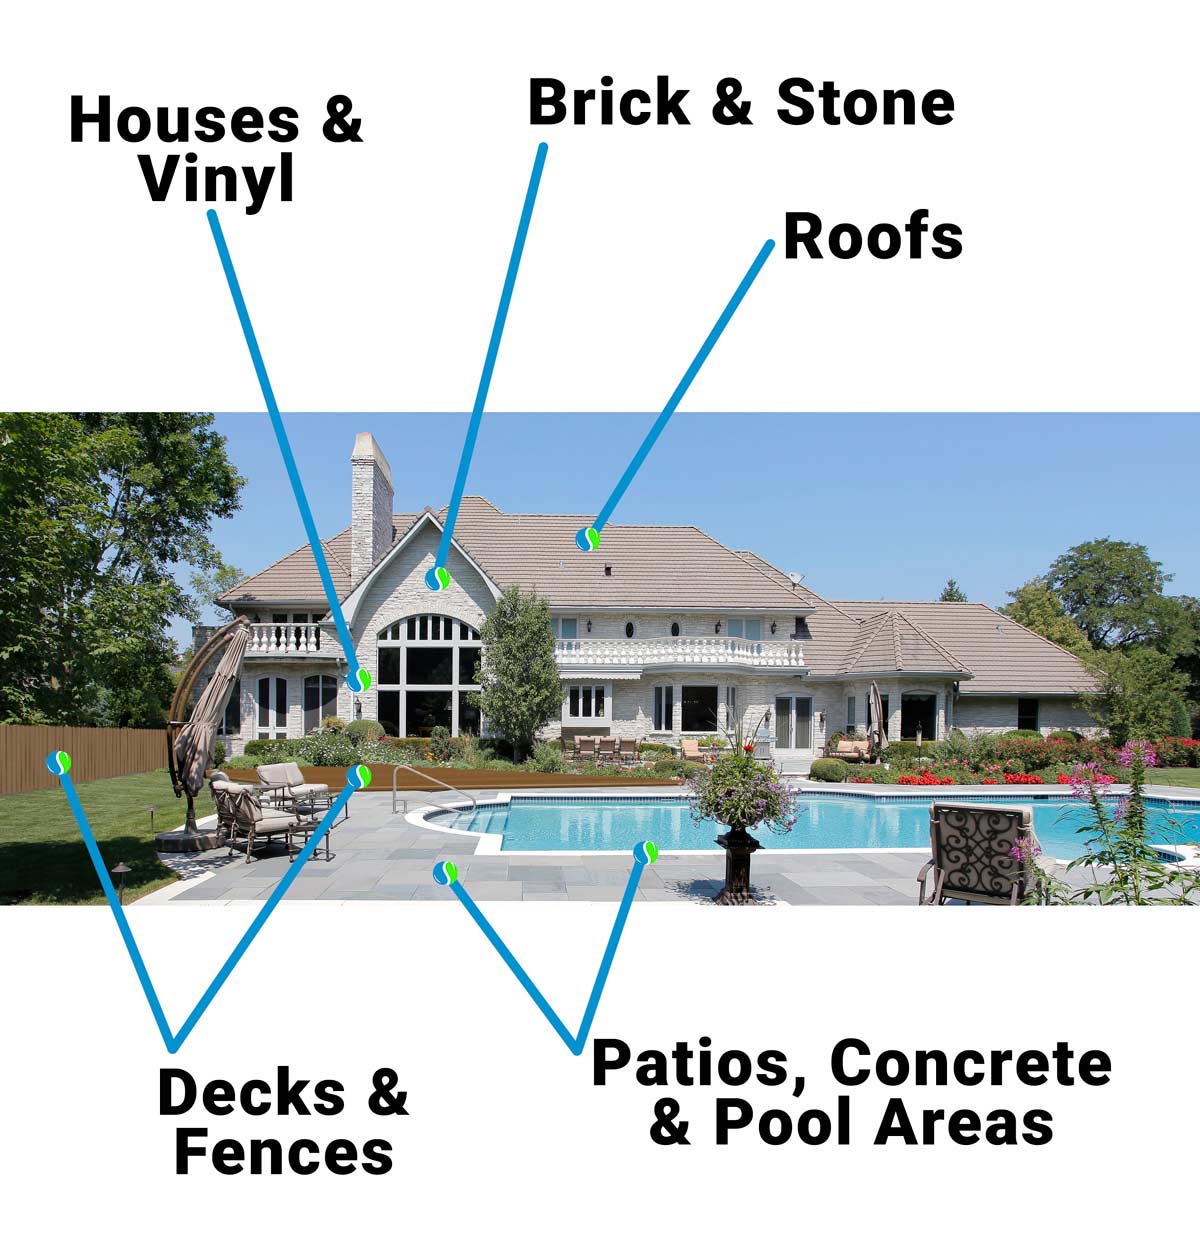 pressure washing houses and vinyl, brick and stone, roofs, decks and fences, patios concrete and pool areas